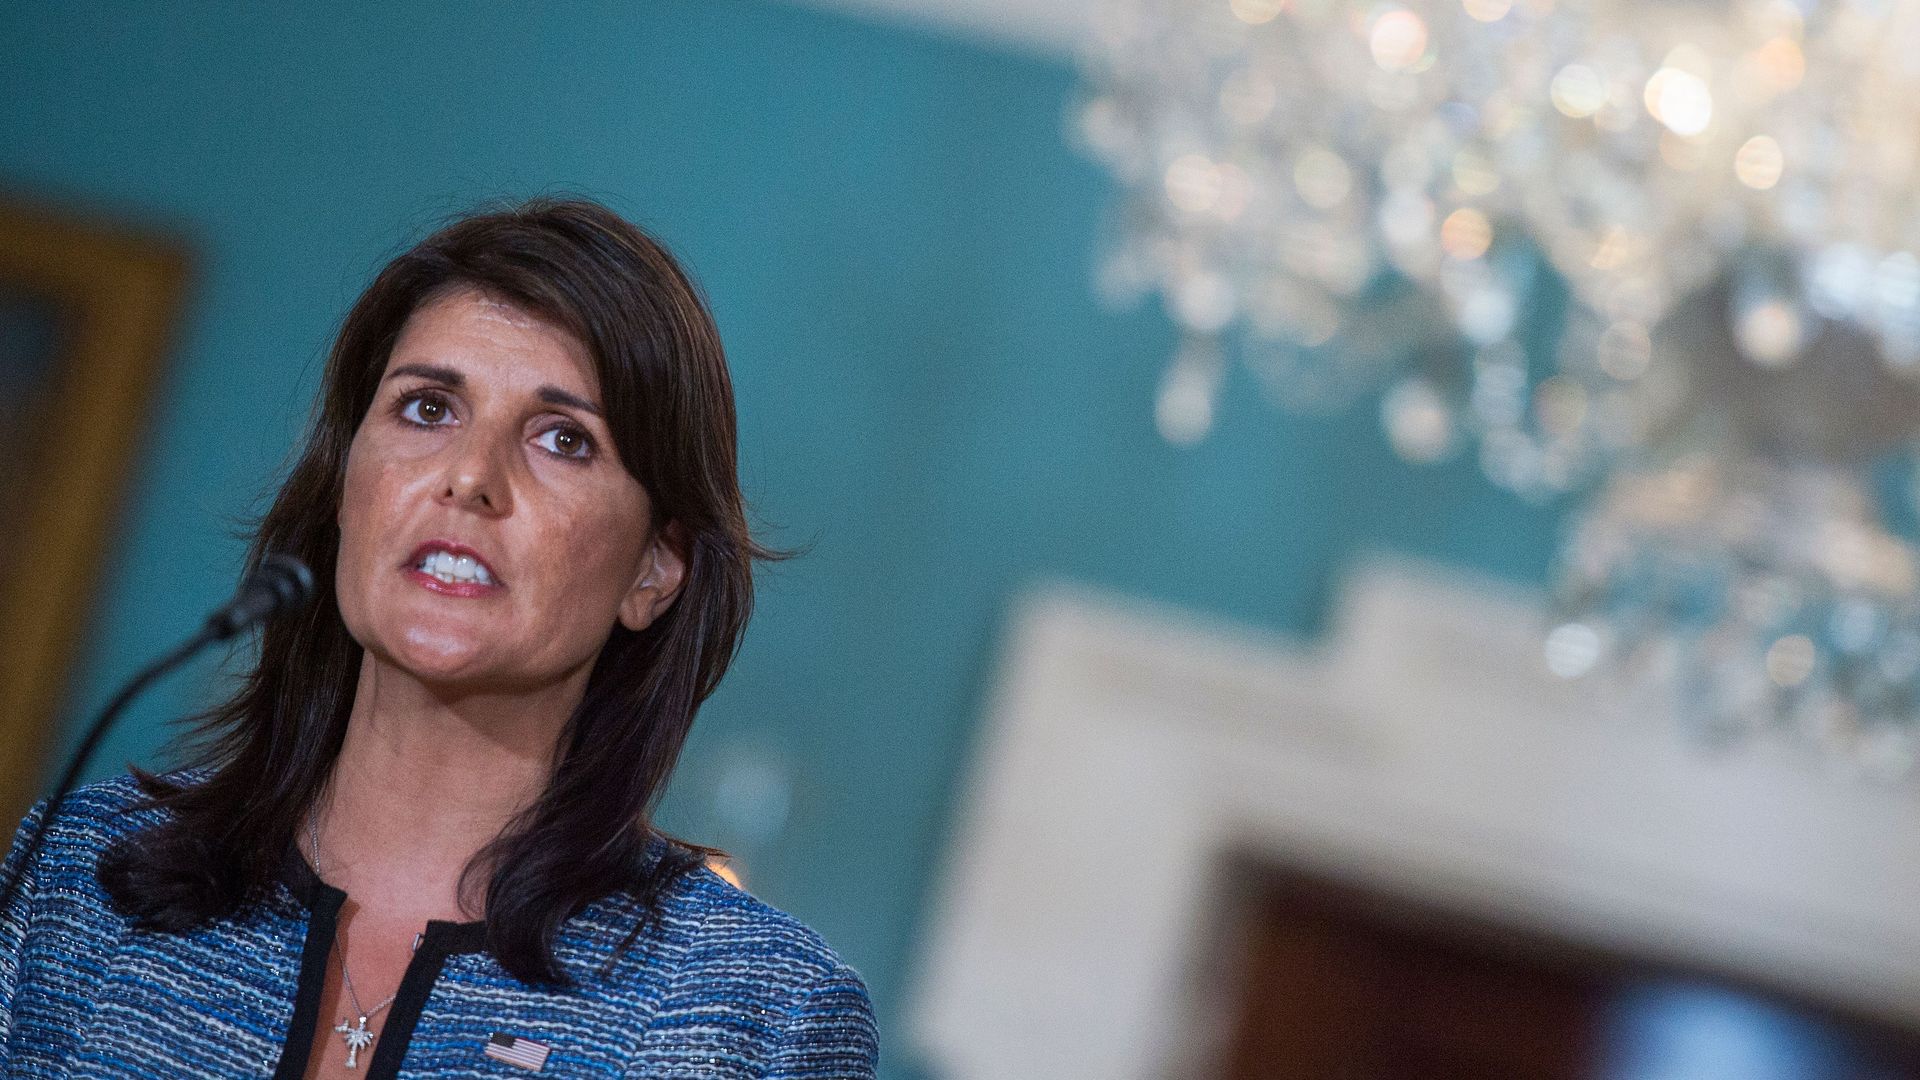 Nikki Haley announcing the decision to leave the Human Rights council